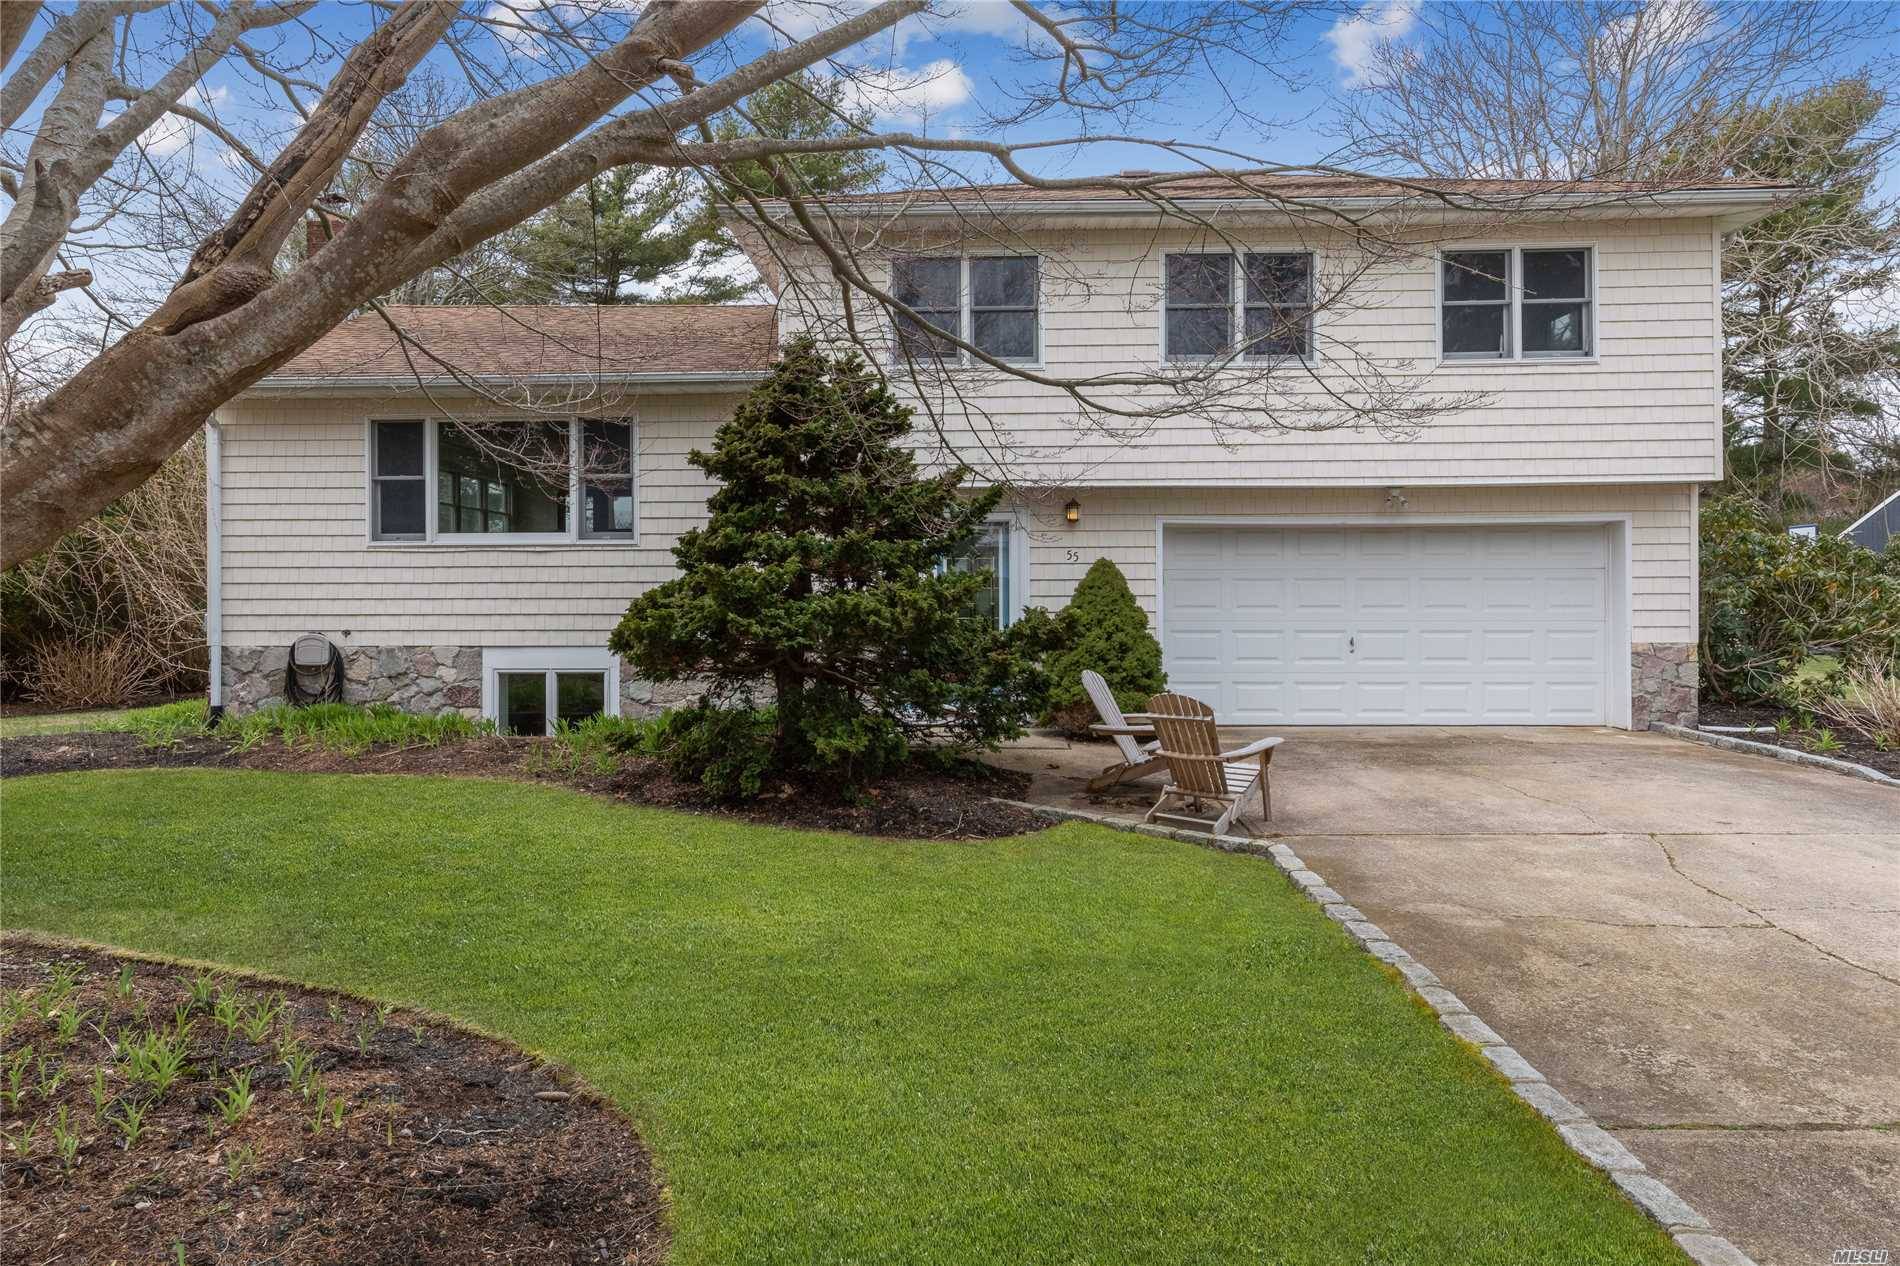 Located In A Quiet, Desirable Southold Neighborhood, This 4 Bedroom, 2.